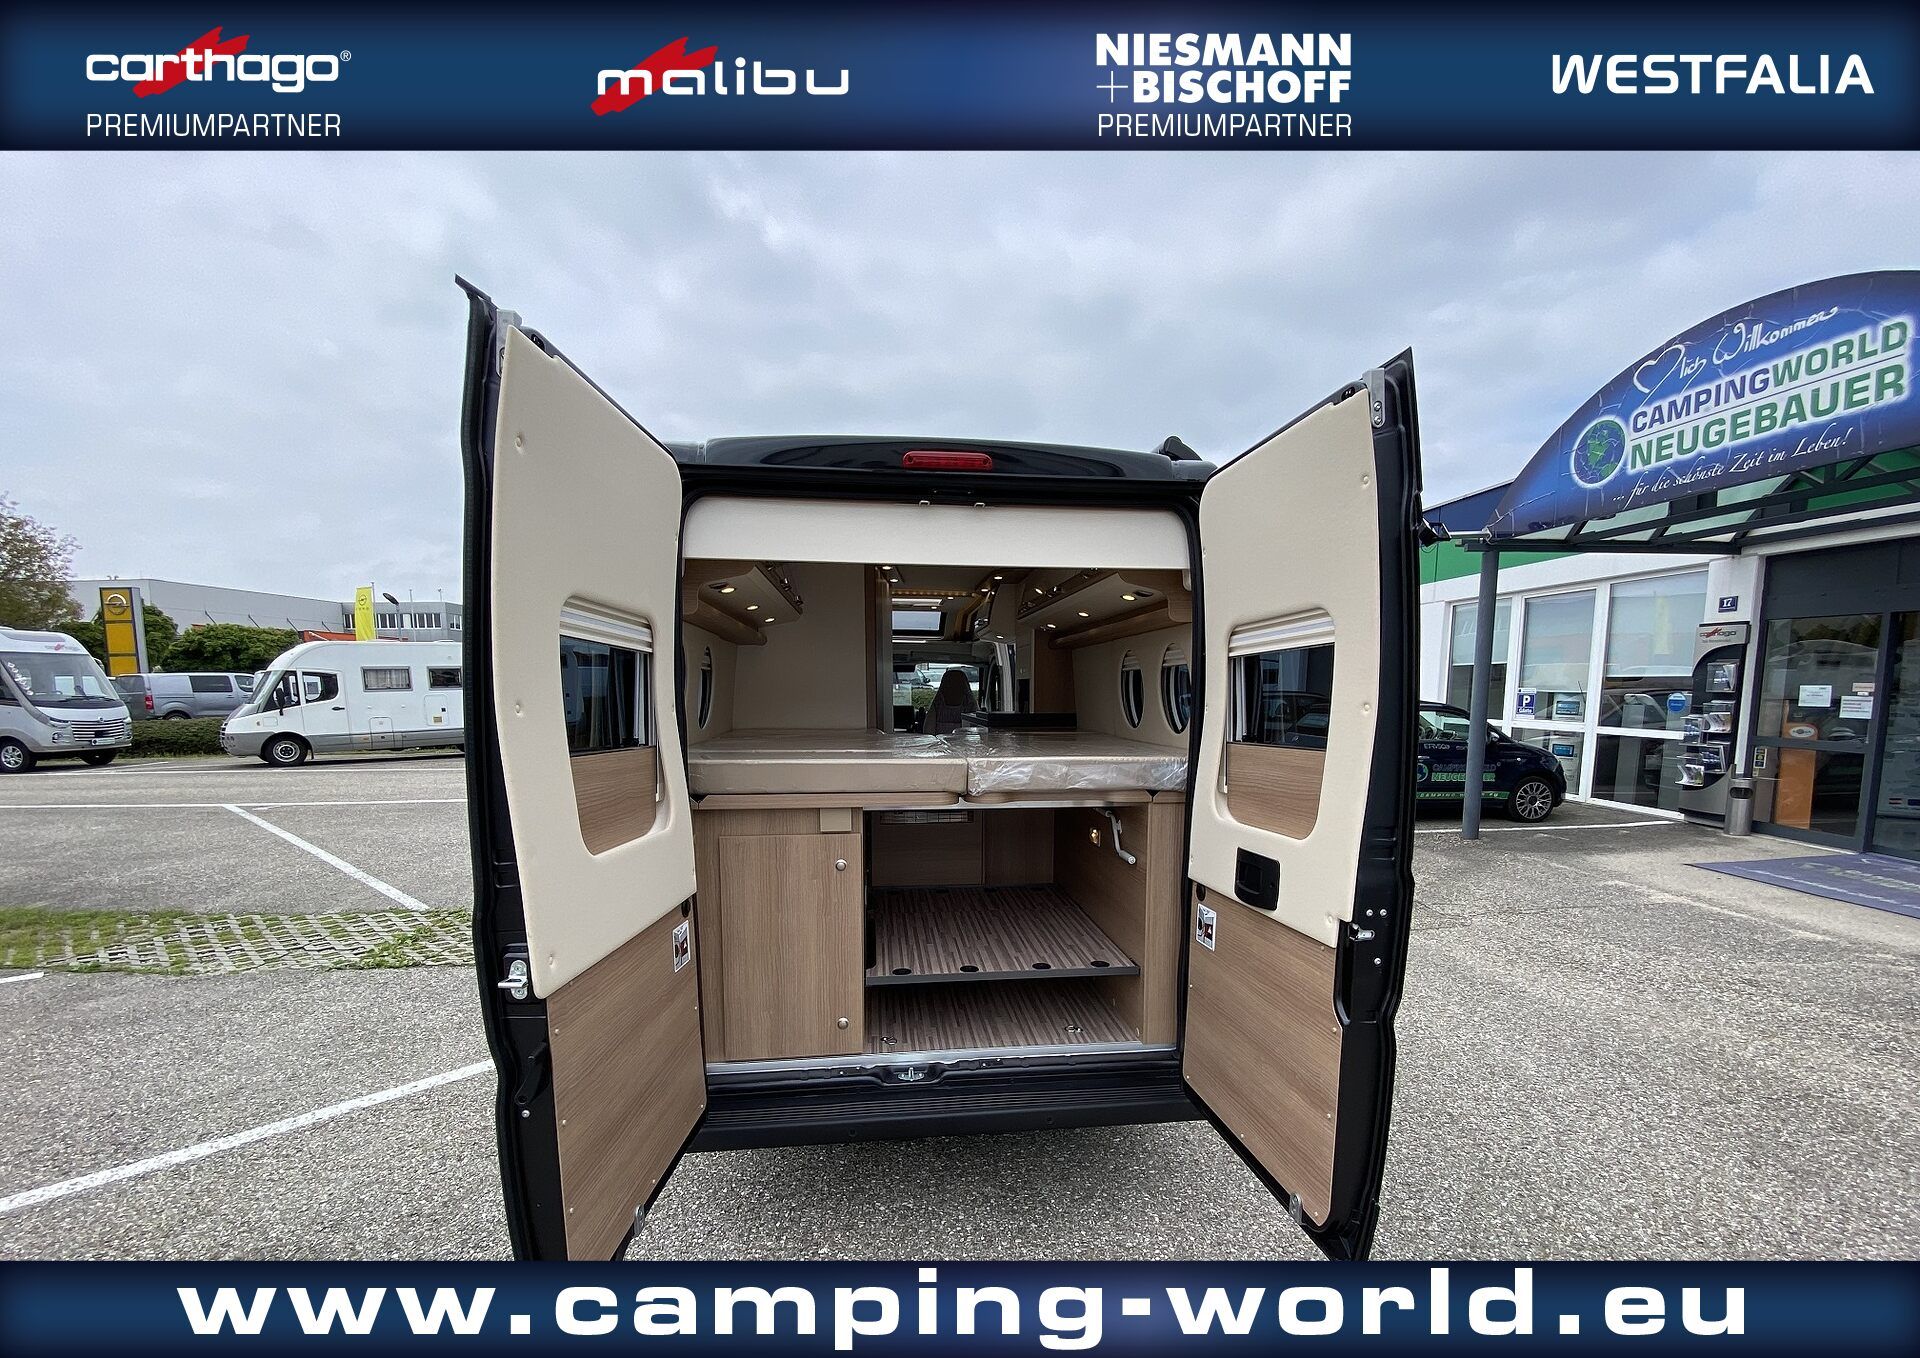 Malibu First Class - Two Rooms 640 LE RB Charming GT - Campingworld  Neugebauer